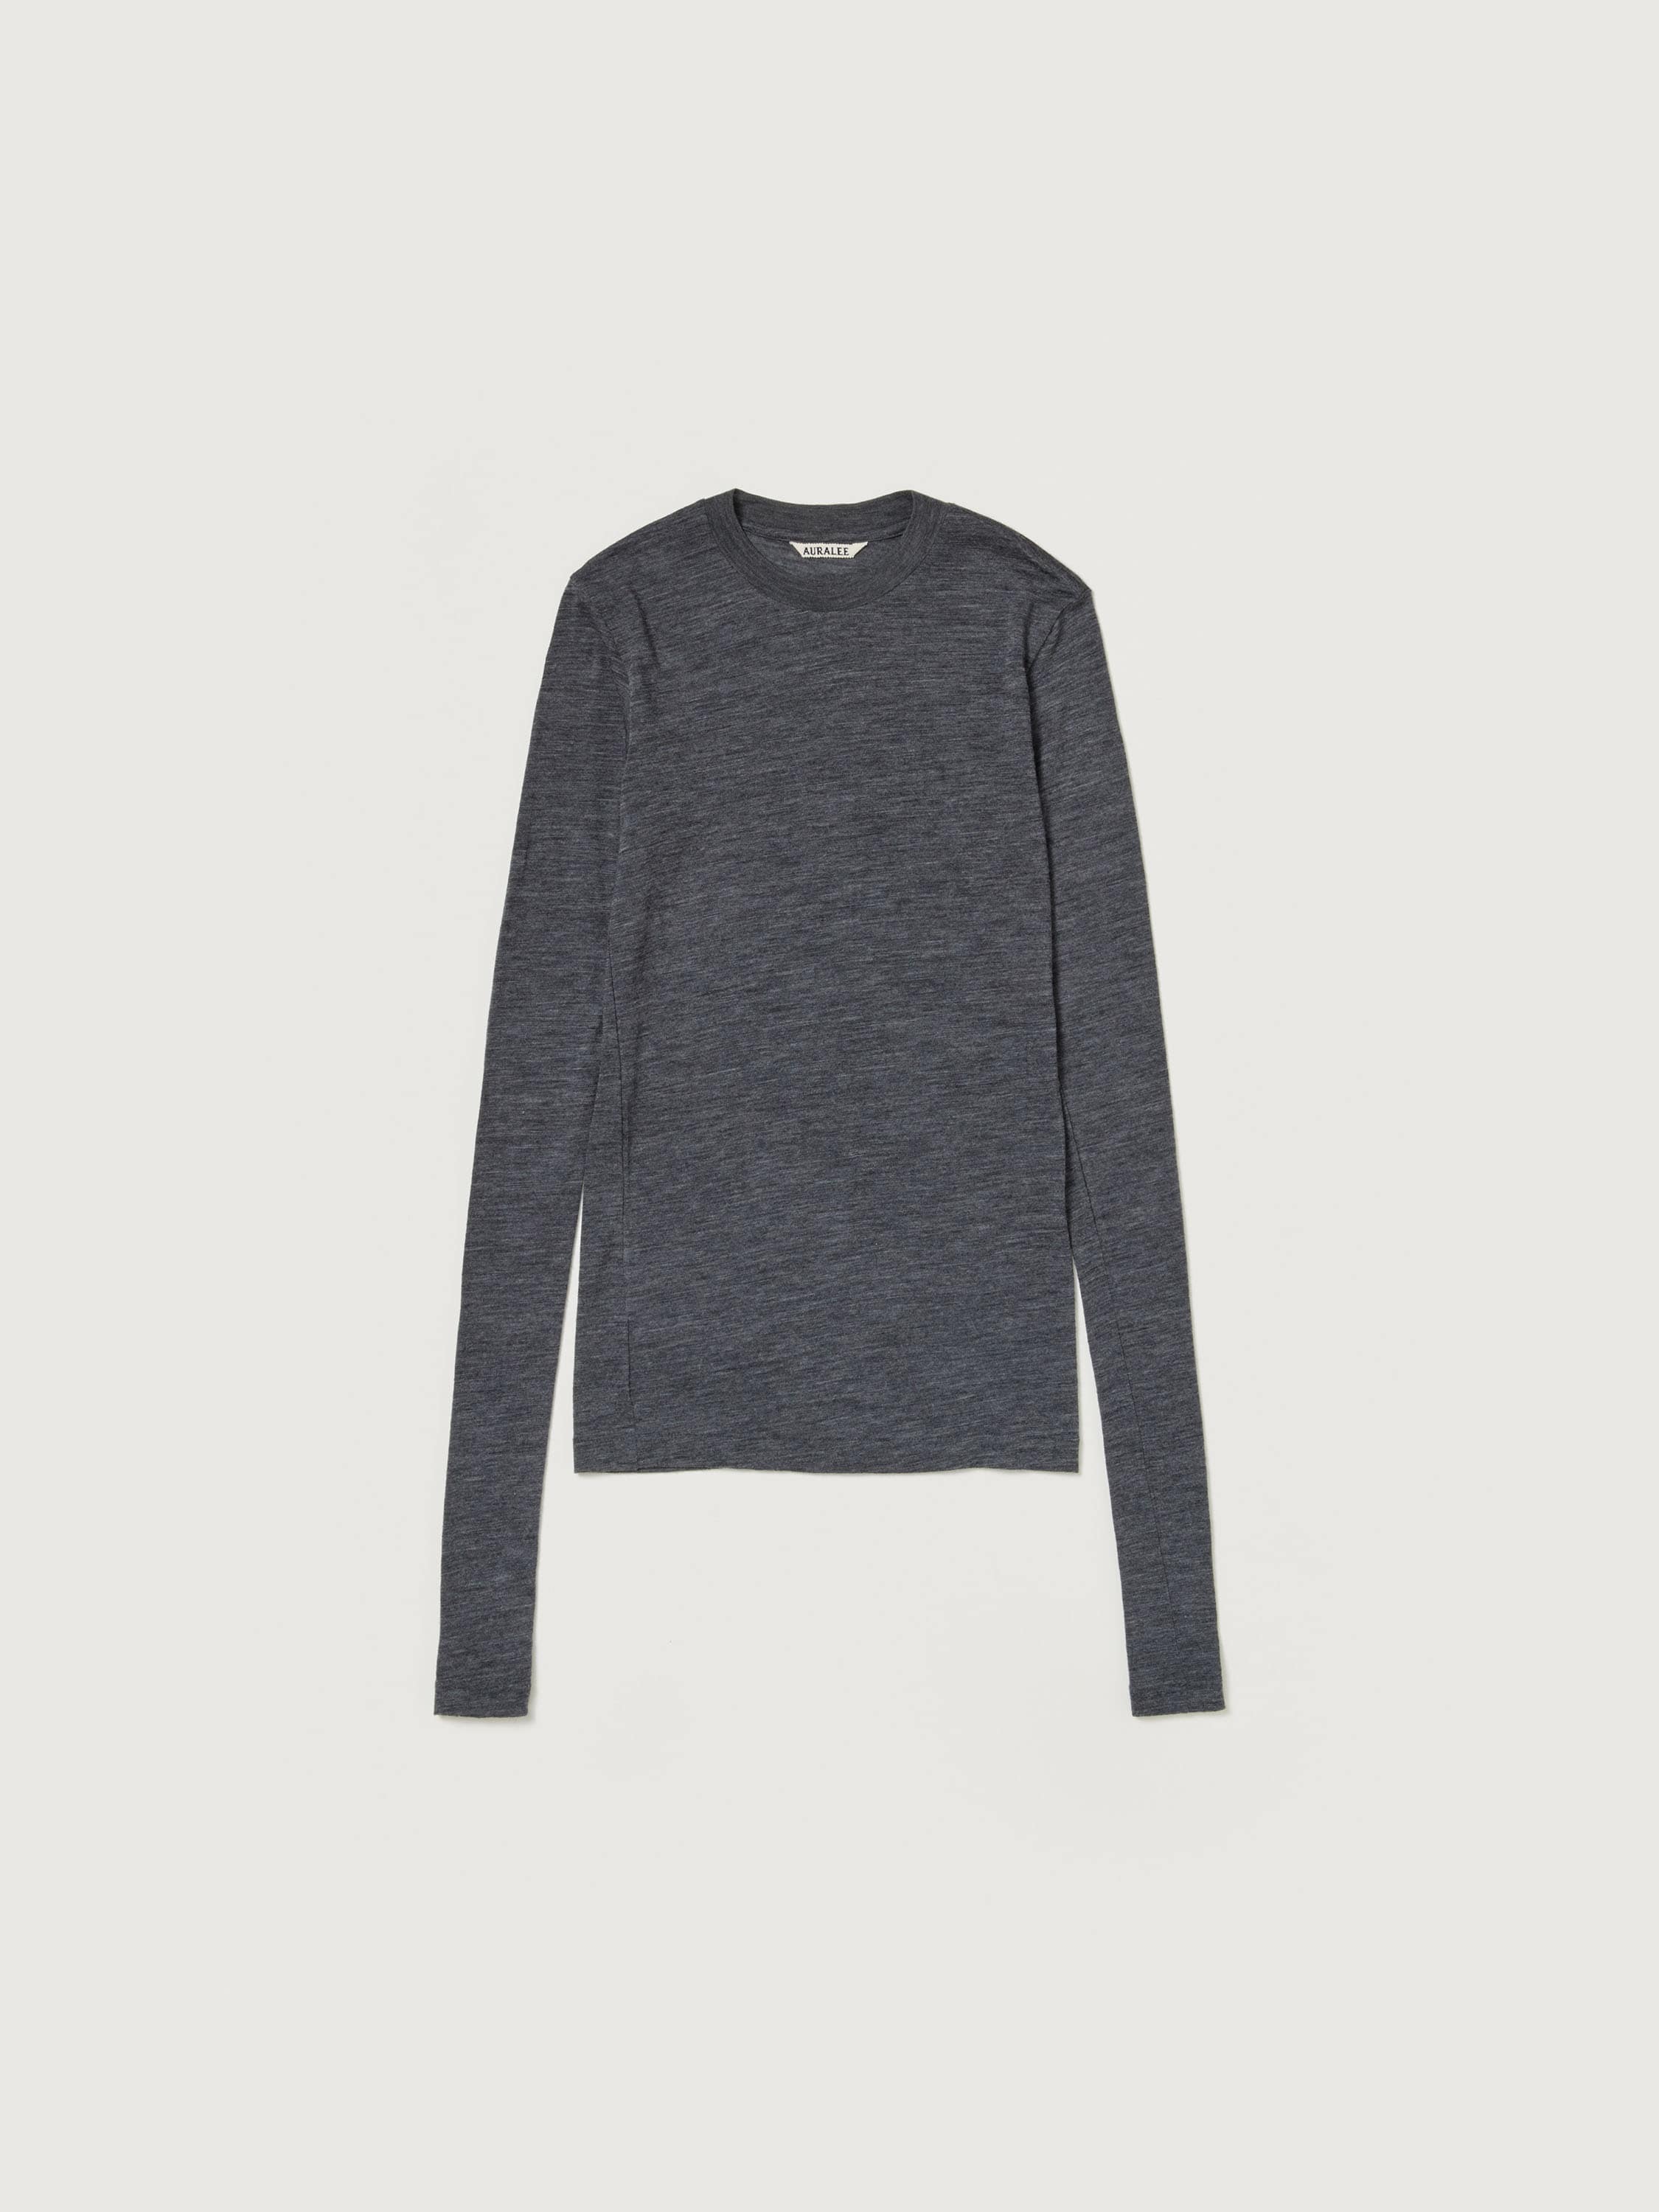 SUPER SOFT WOOL SHEER JERSEY L/S TEE 詳細画像 TOP CHARCOAL 1